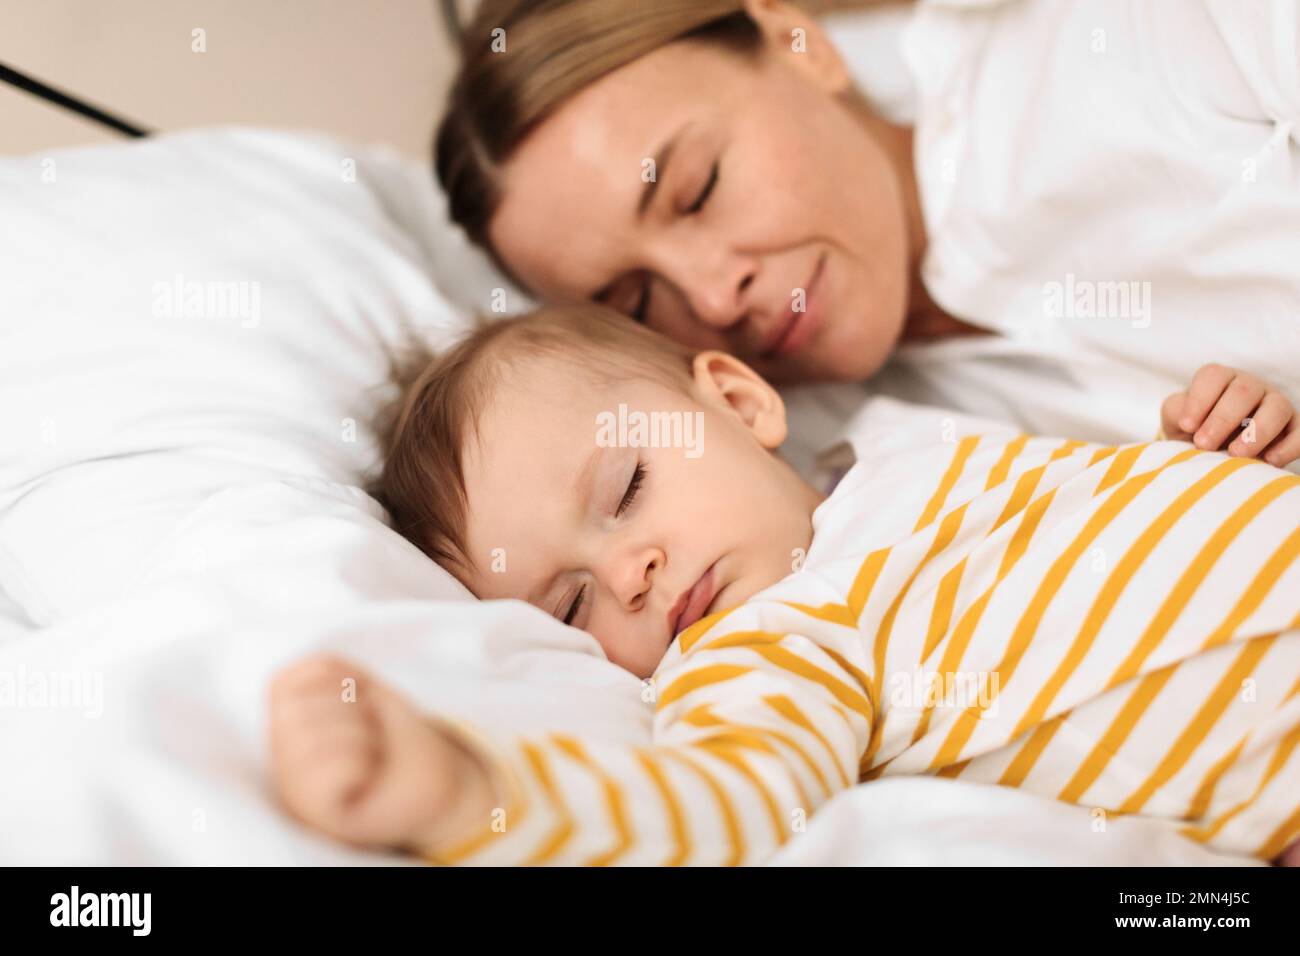 Bed-sharing with baby concept. Adorable infant child girl sleeping with her mother on bed in bedroom during daytime Stock Photo